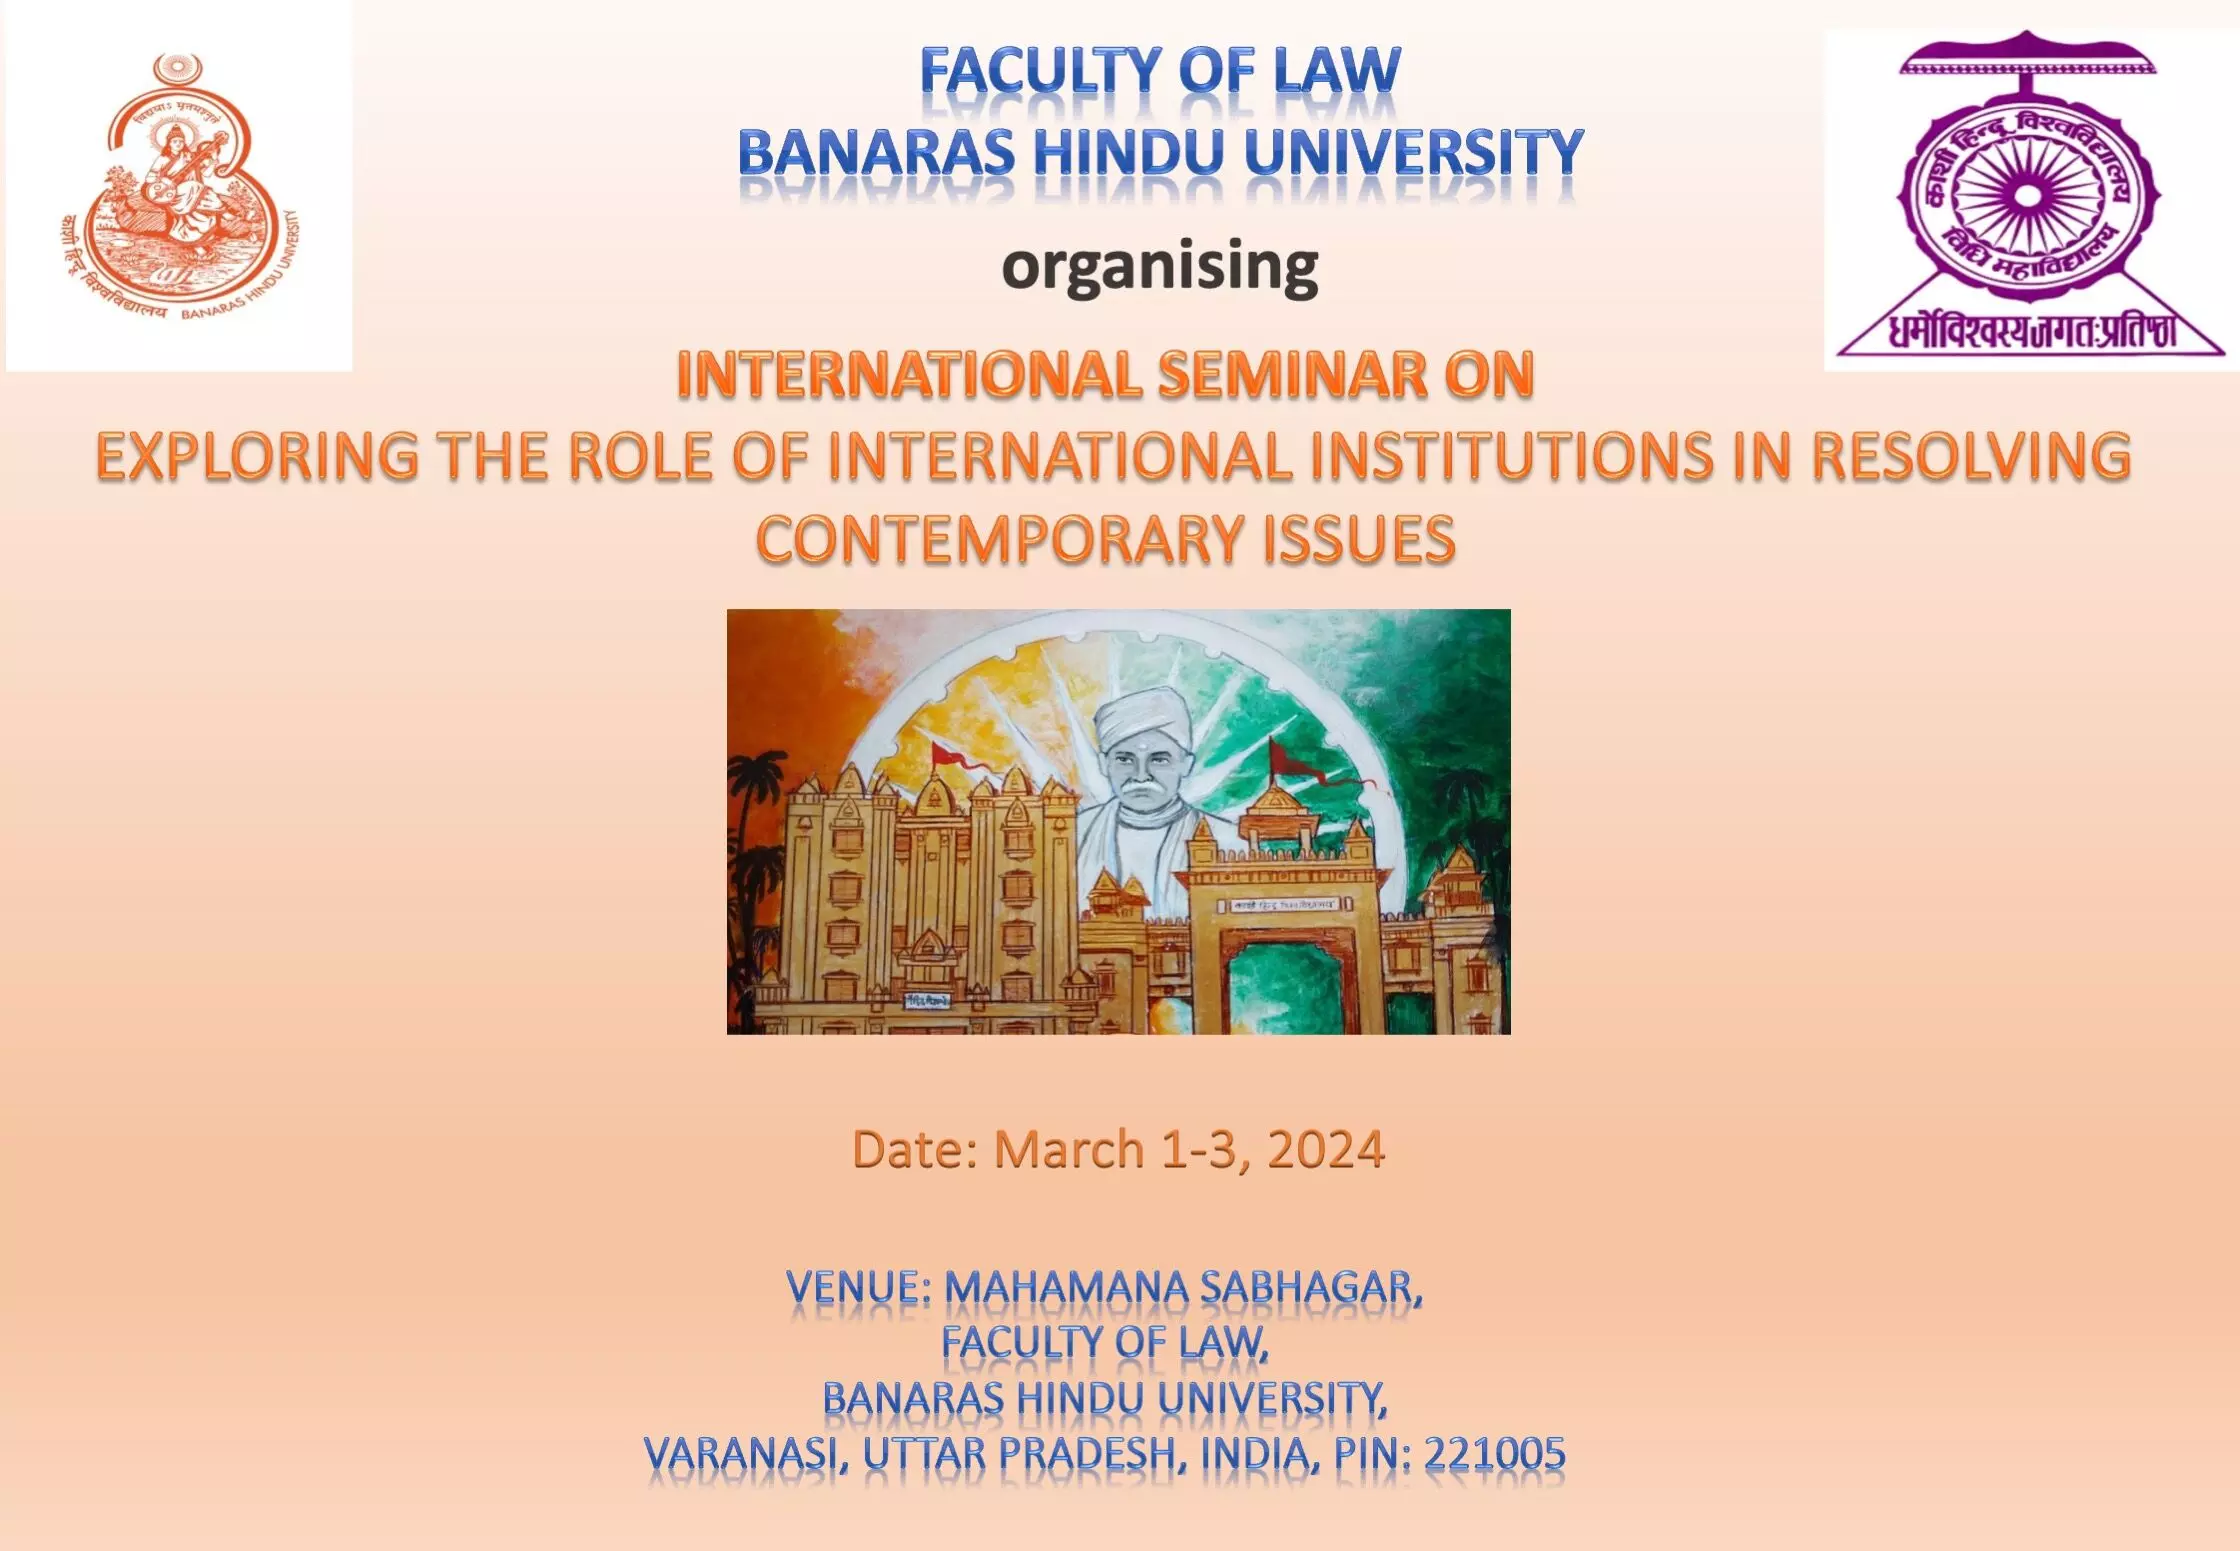 International Seminar on Exploring the Role of International Institutions in Resolving Contemporary Issues 2024 | Faculty of Law, Banaras Hindu University